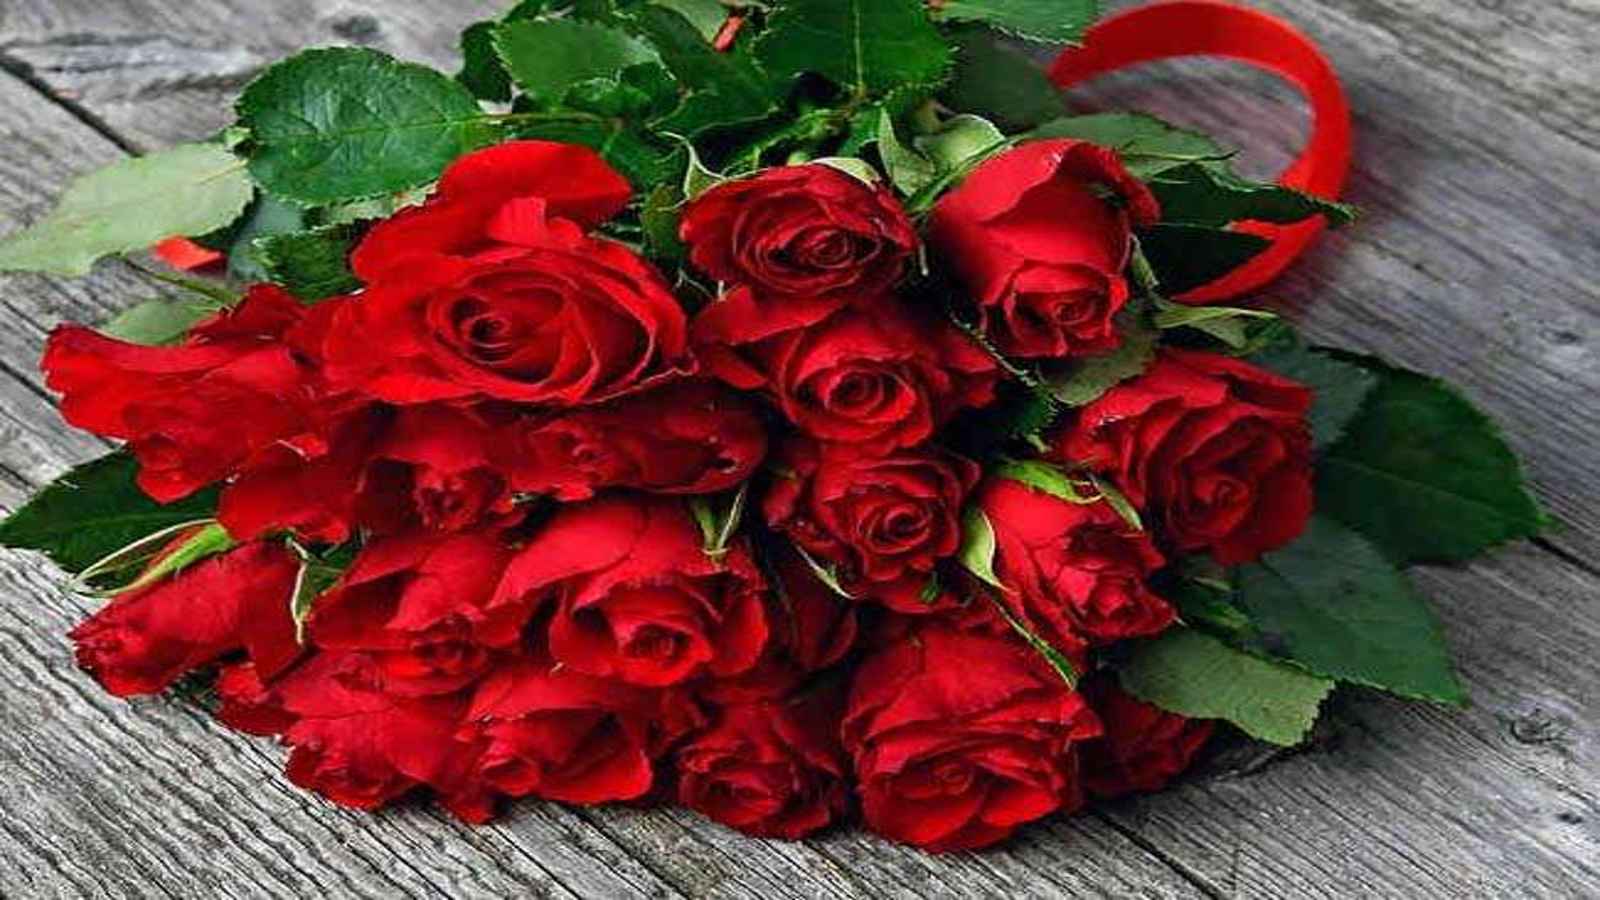 National Red Rose Day 2023: Date, History, Facts about Roses